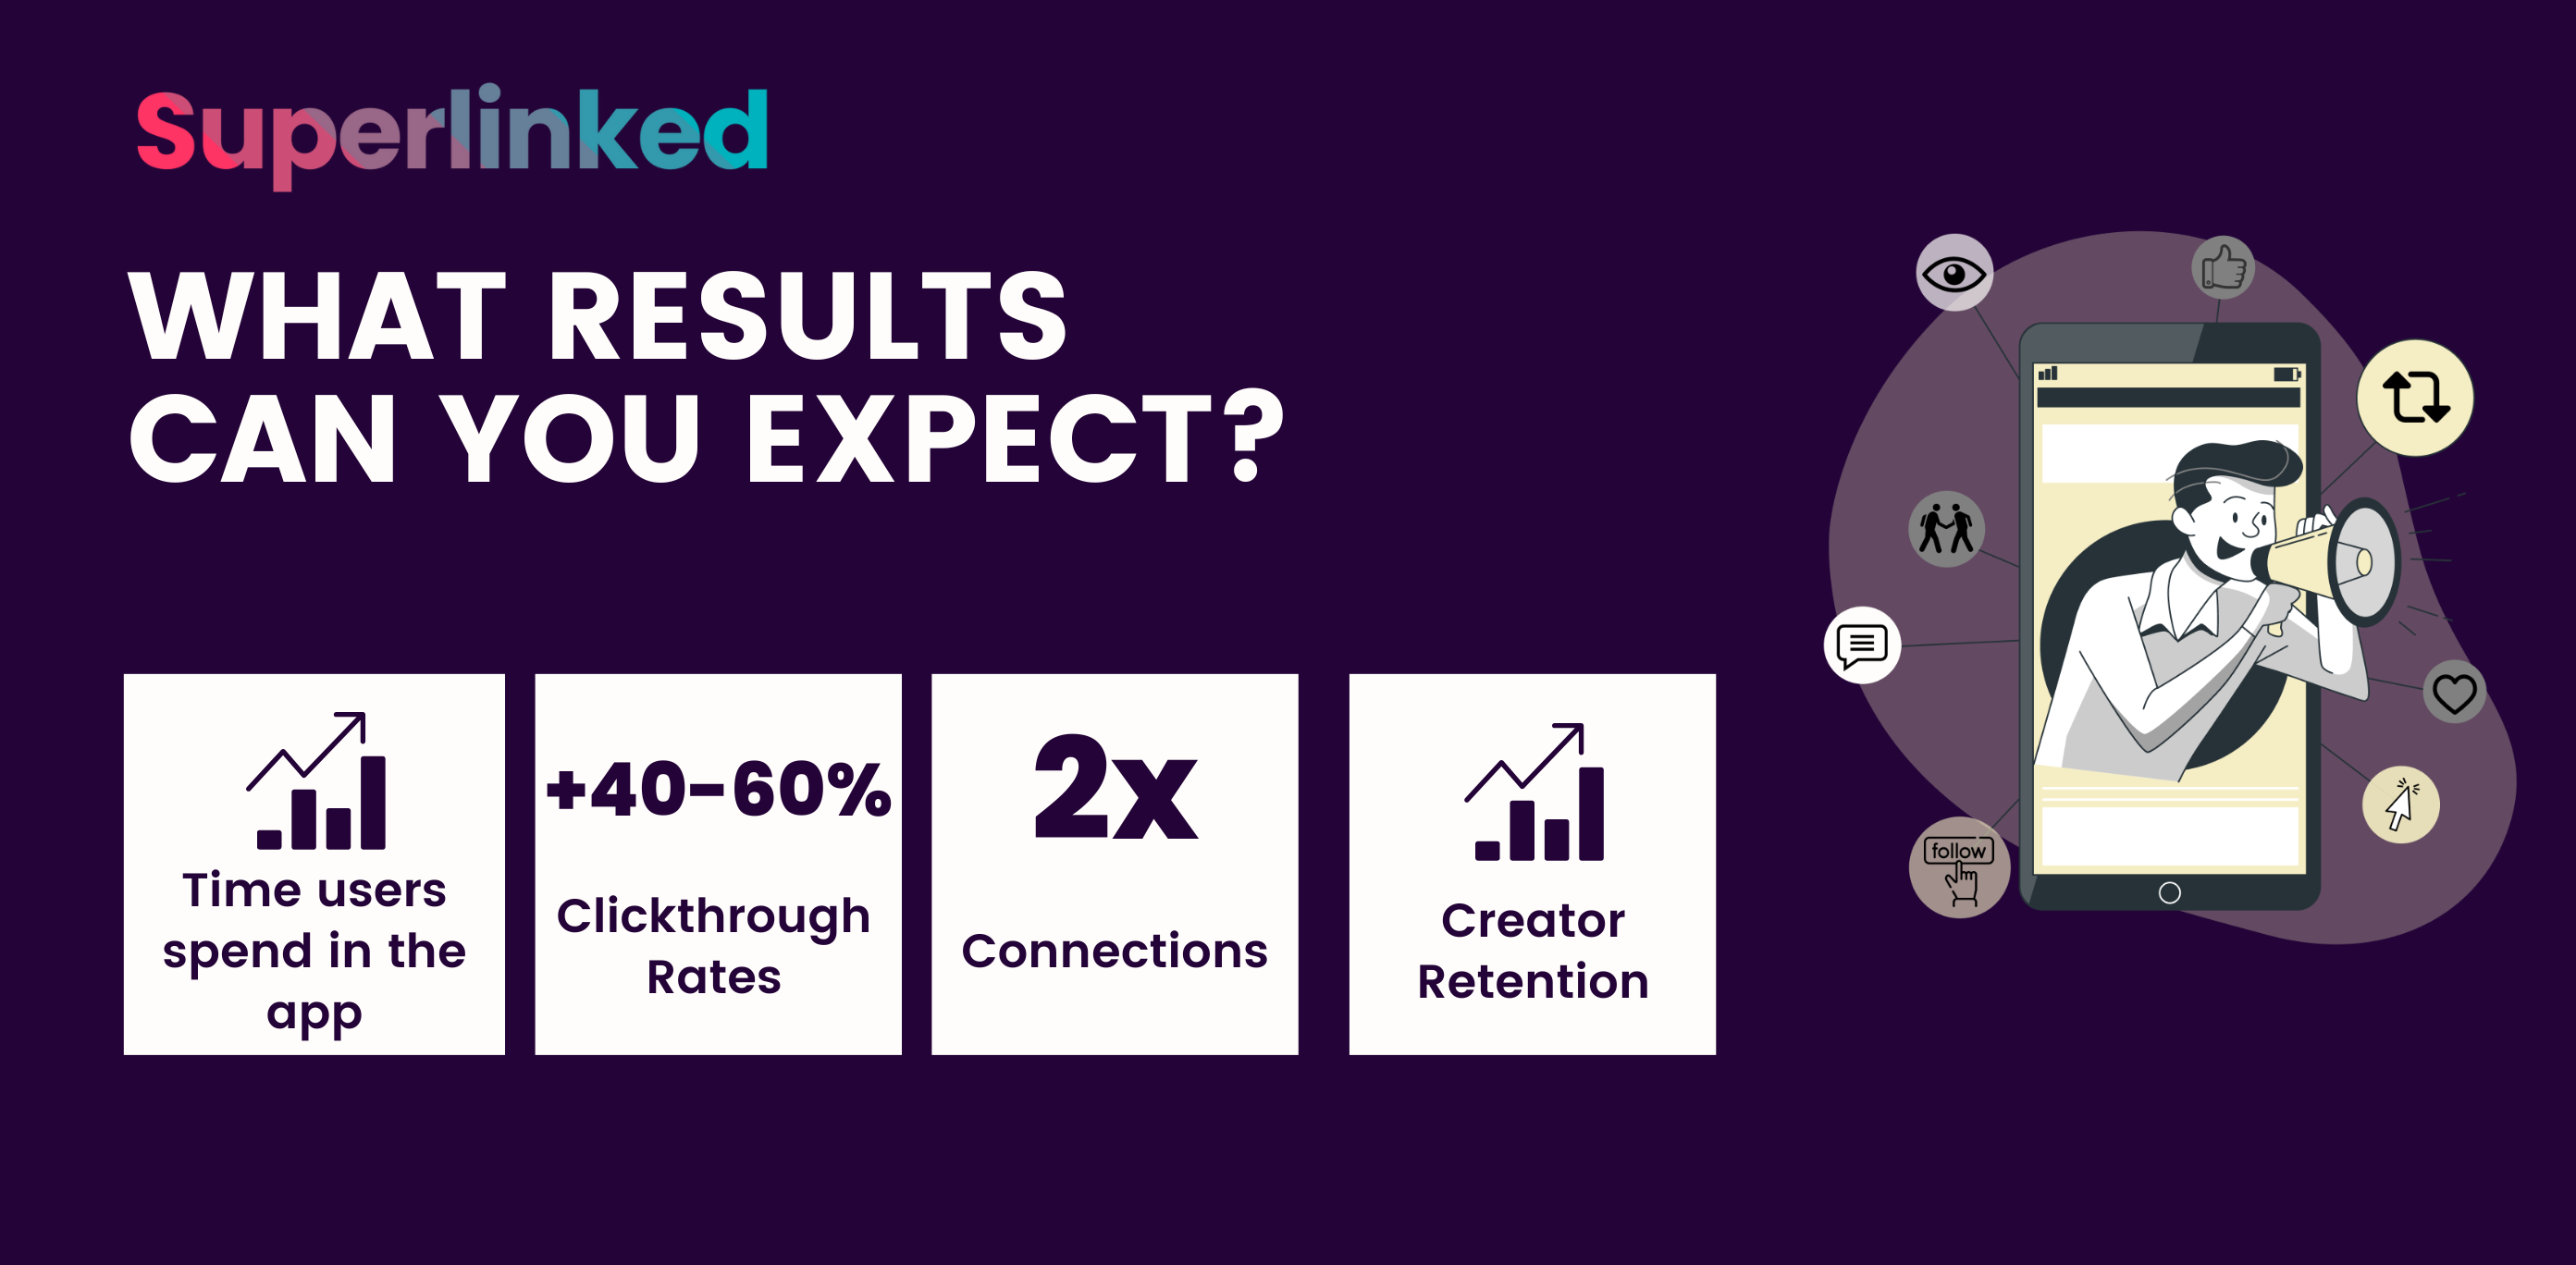 What results can you expect from personalization?